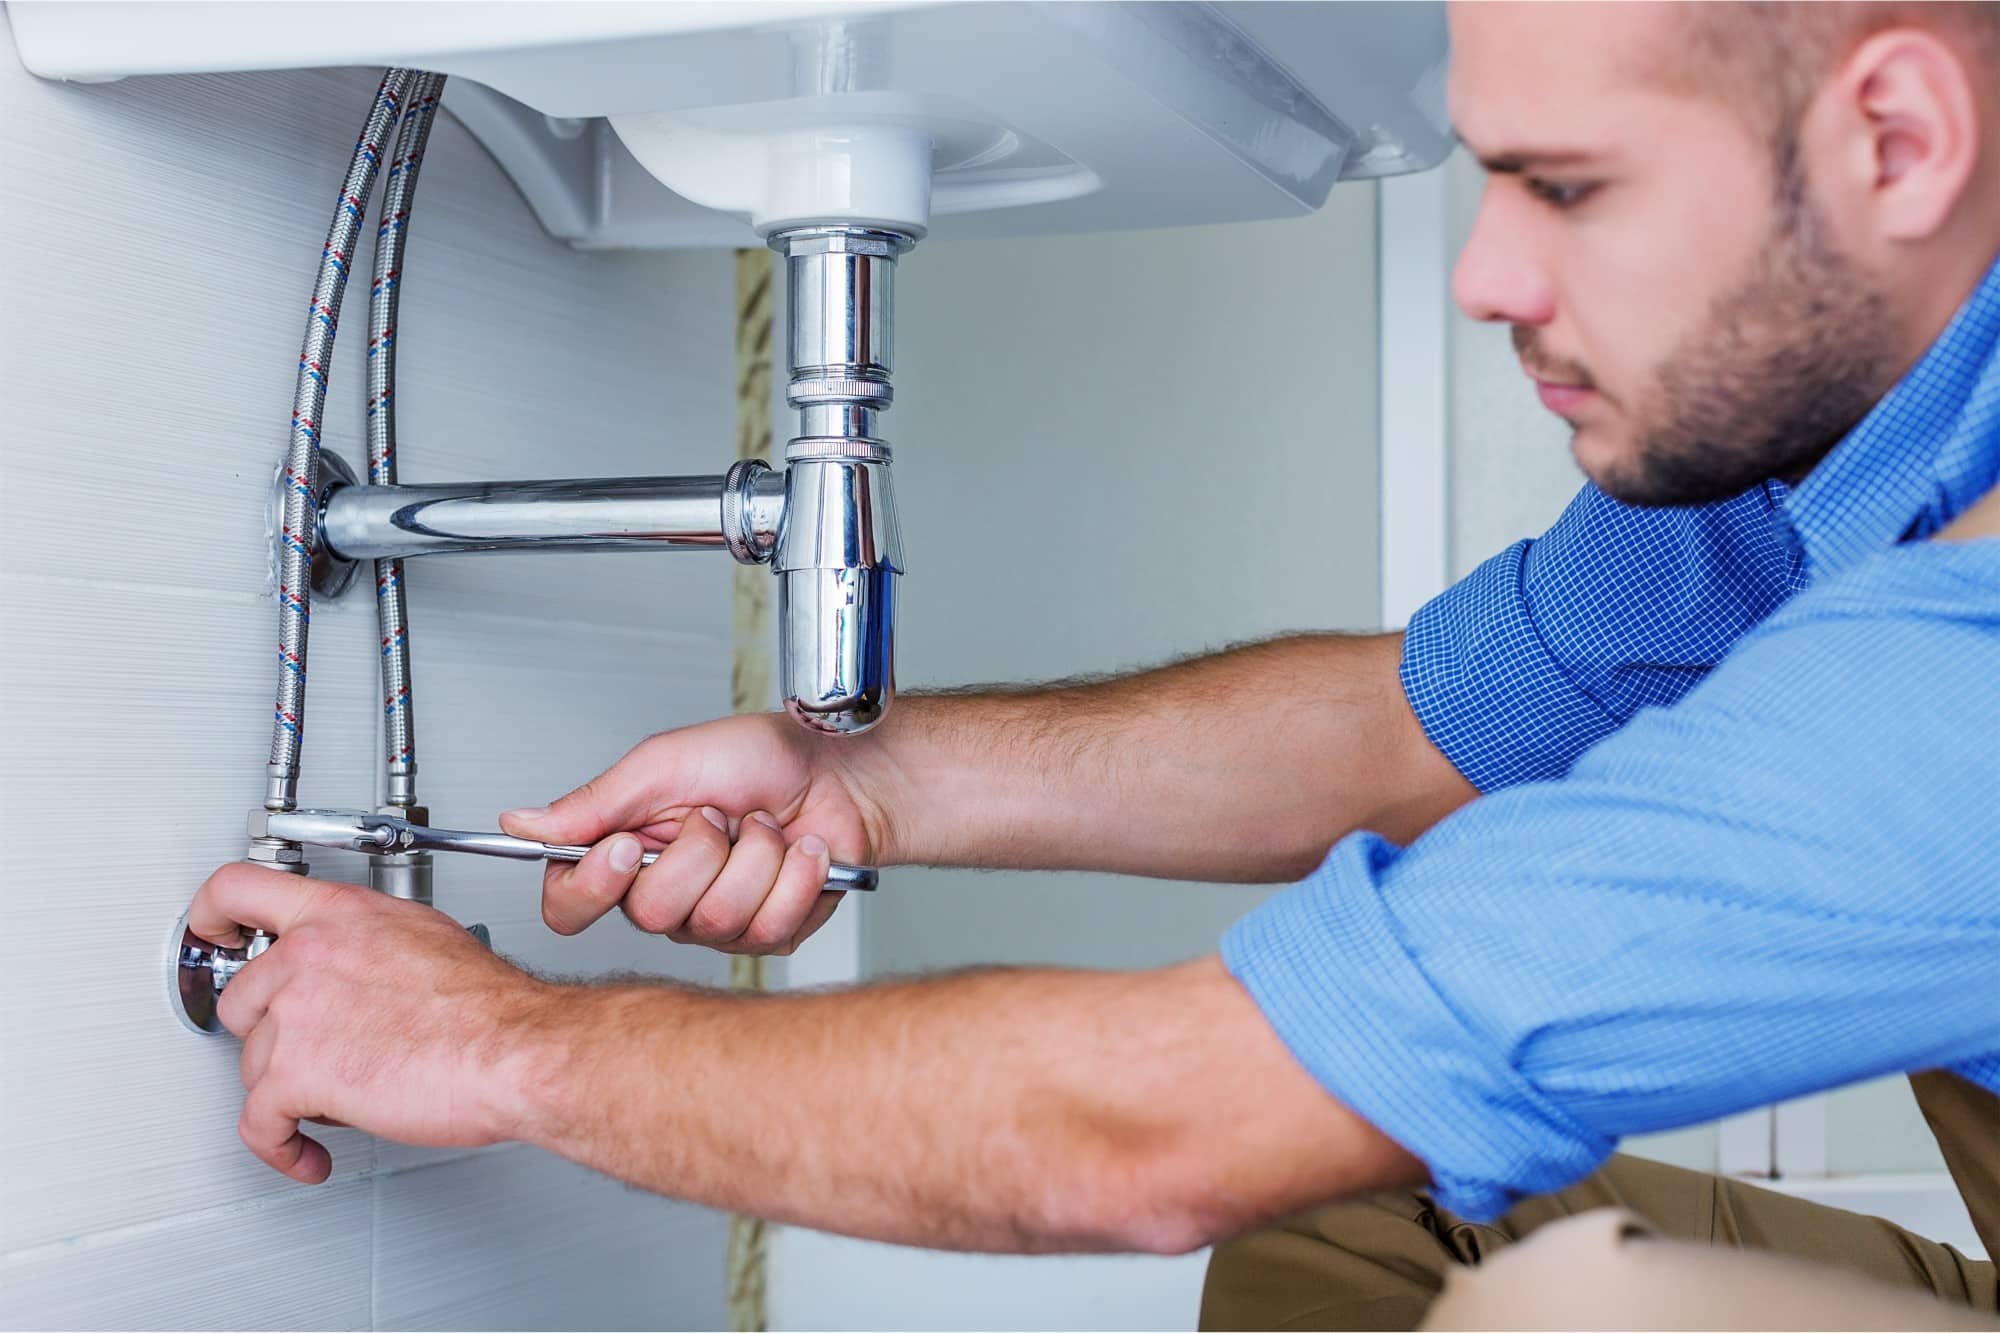 5 Common Plumbing Problems and How To Fix Them